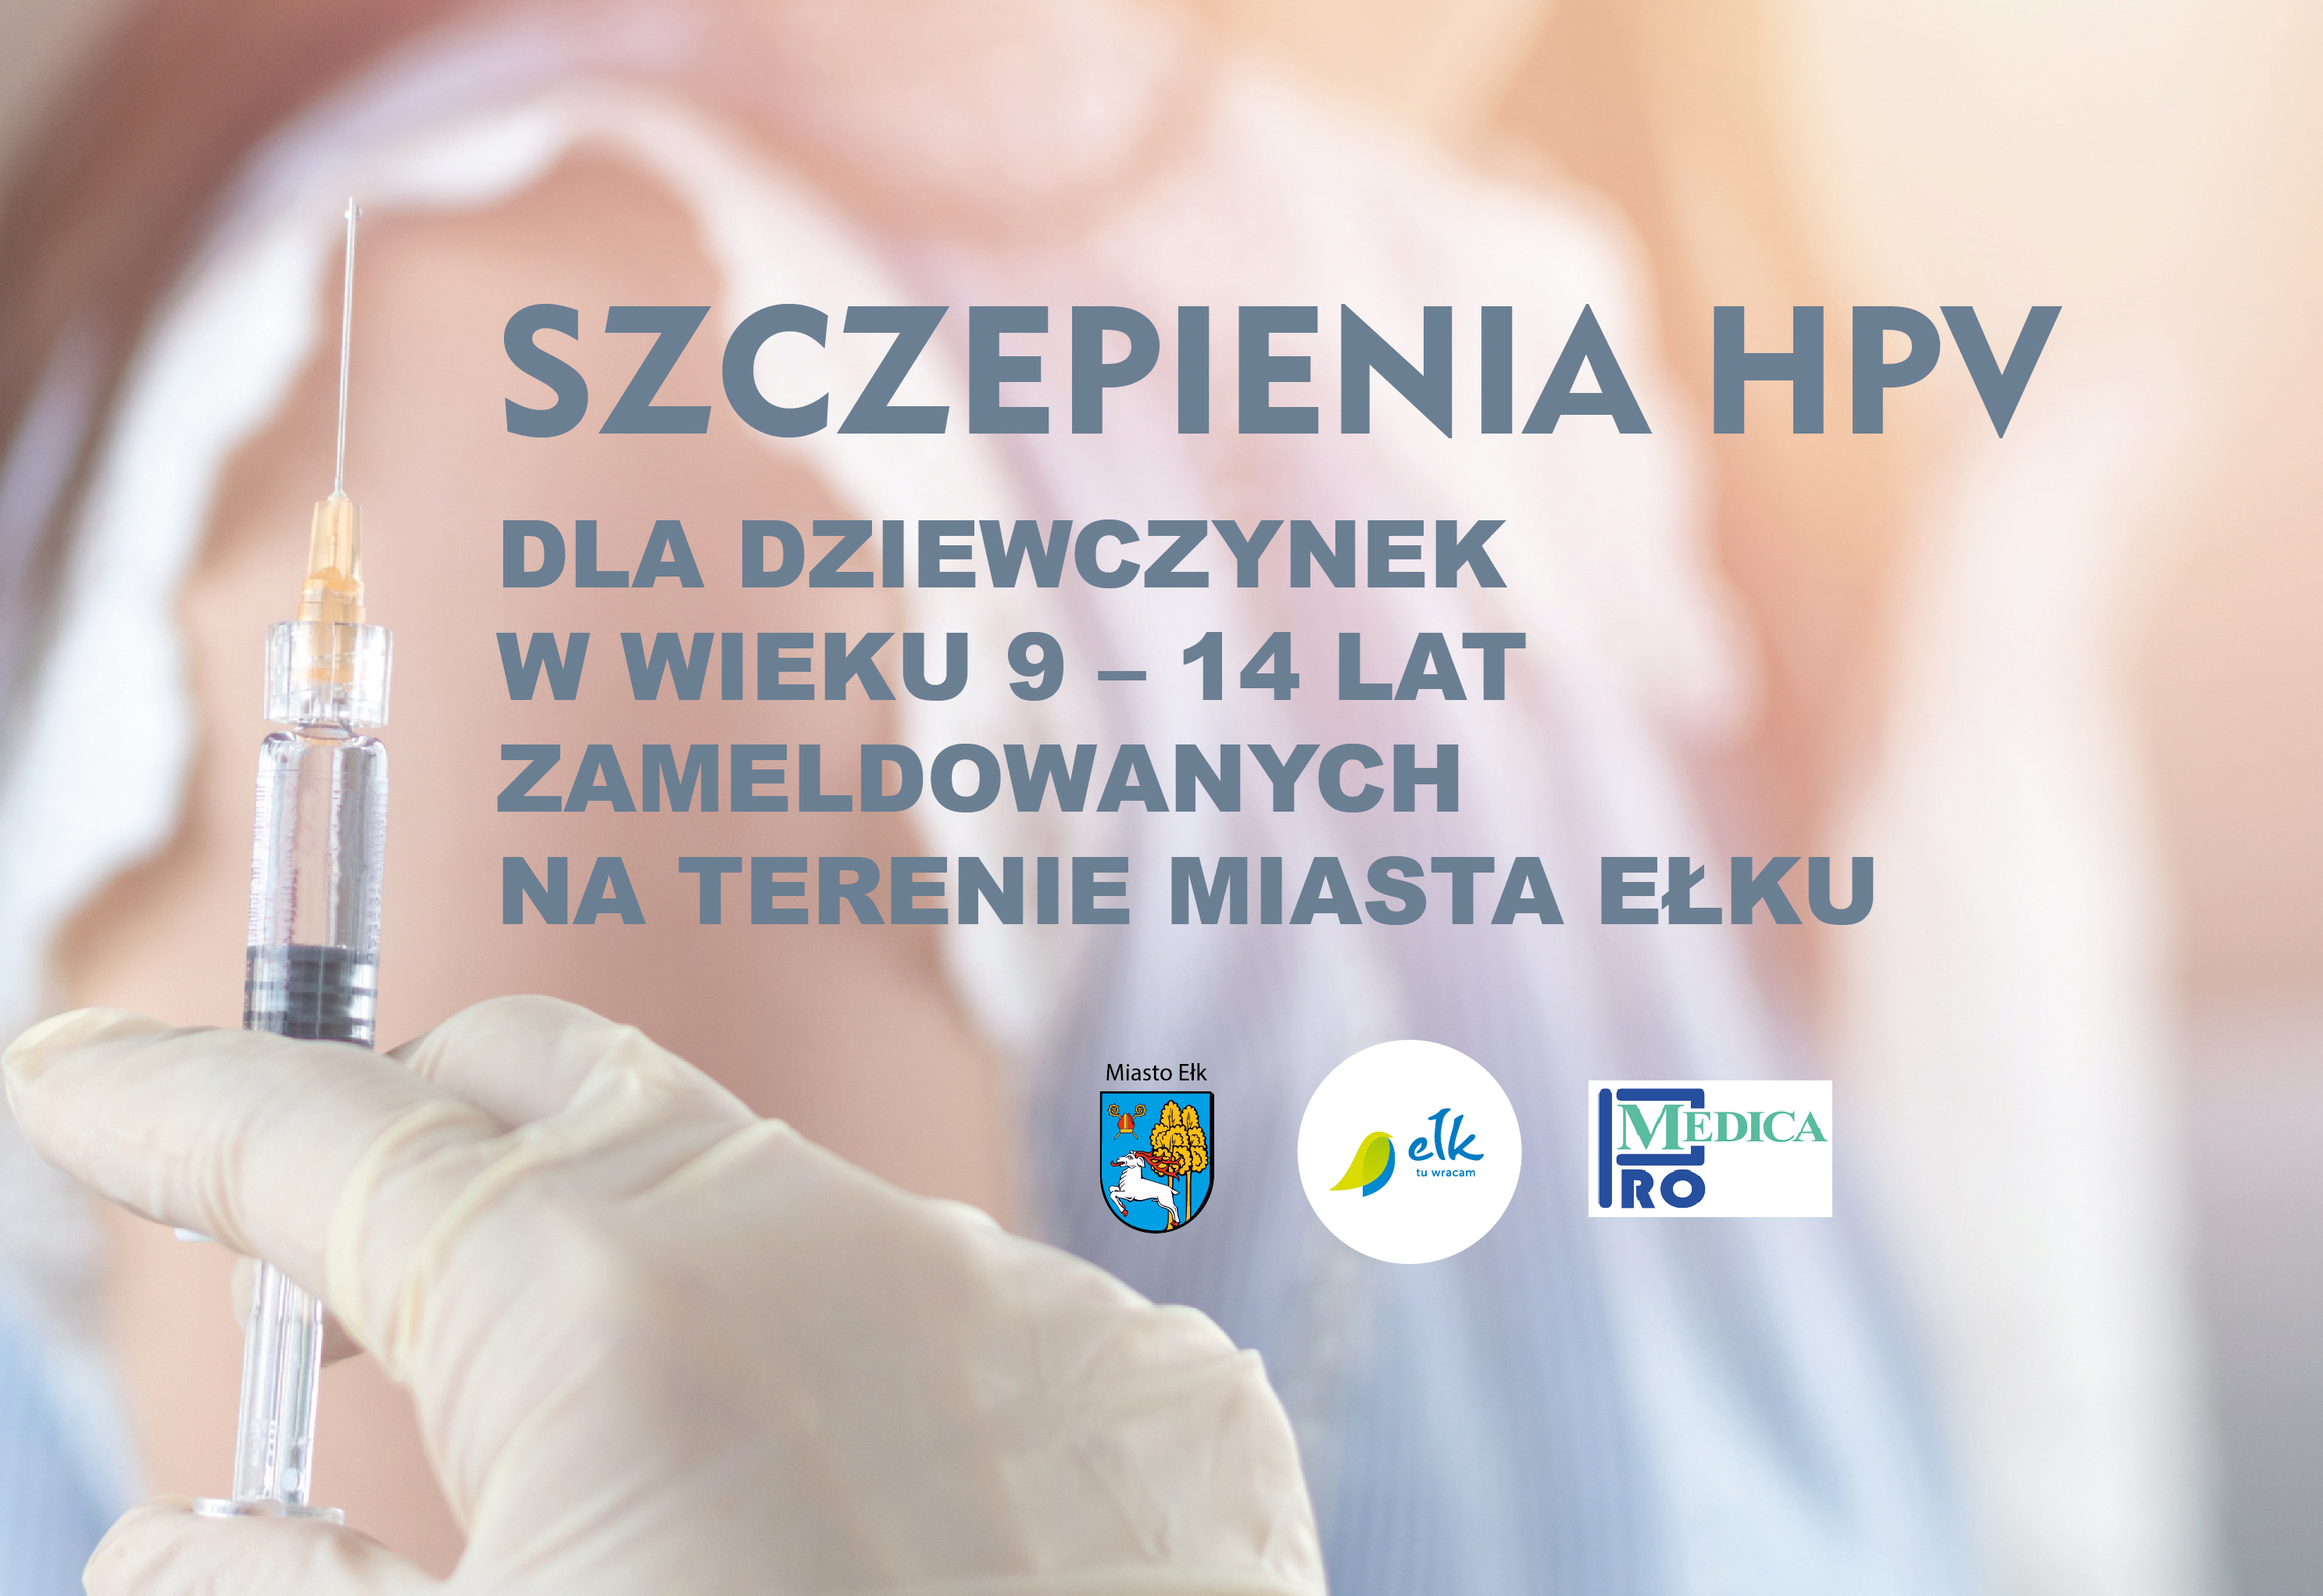 Free HPV vaccinations for girls